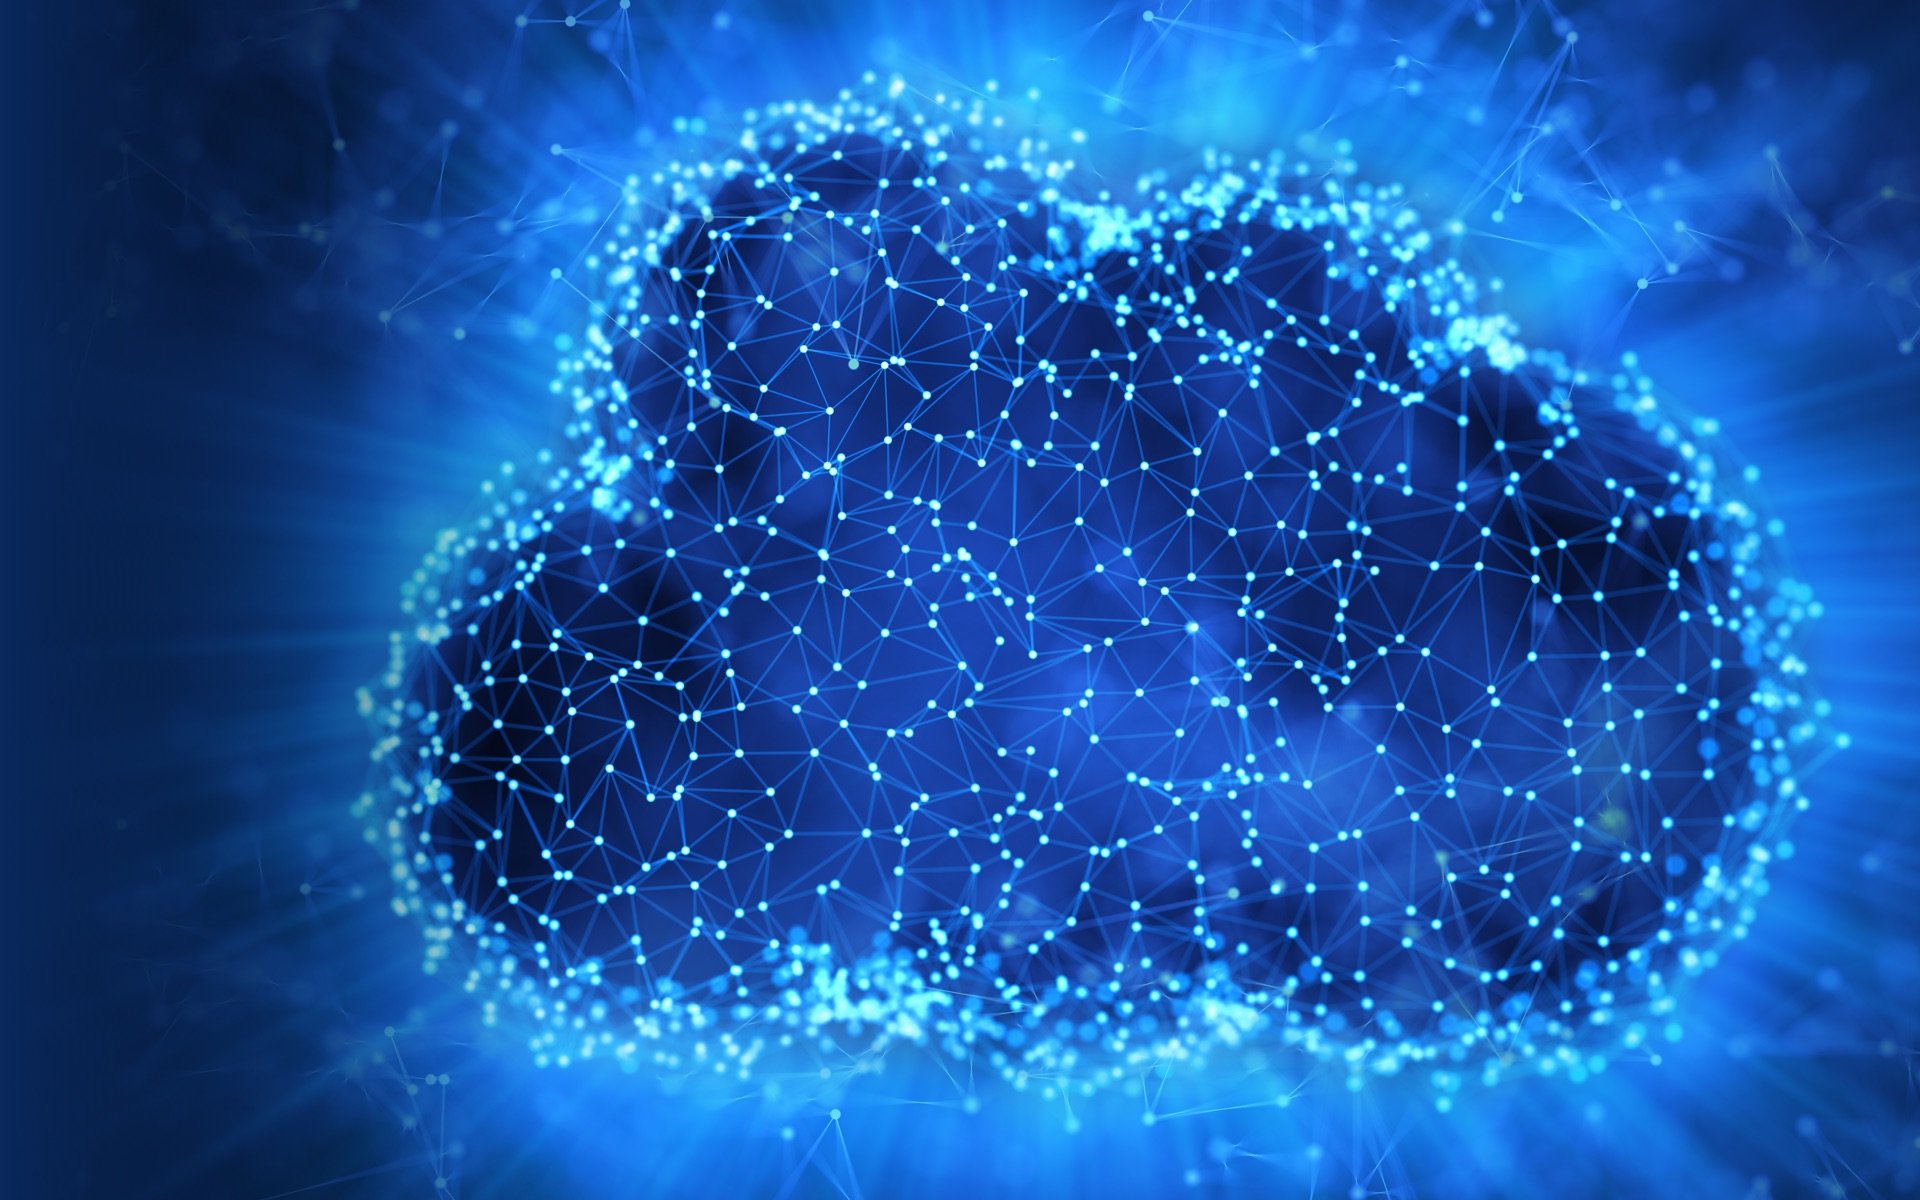 Transitioning big data workloads to the cloud